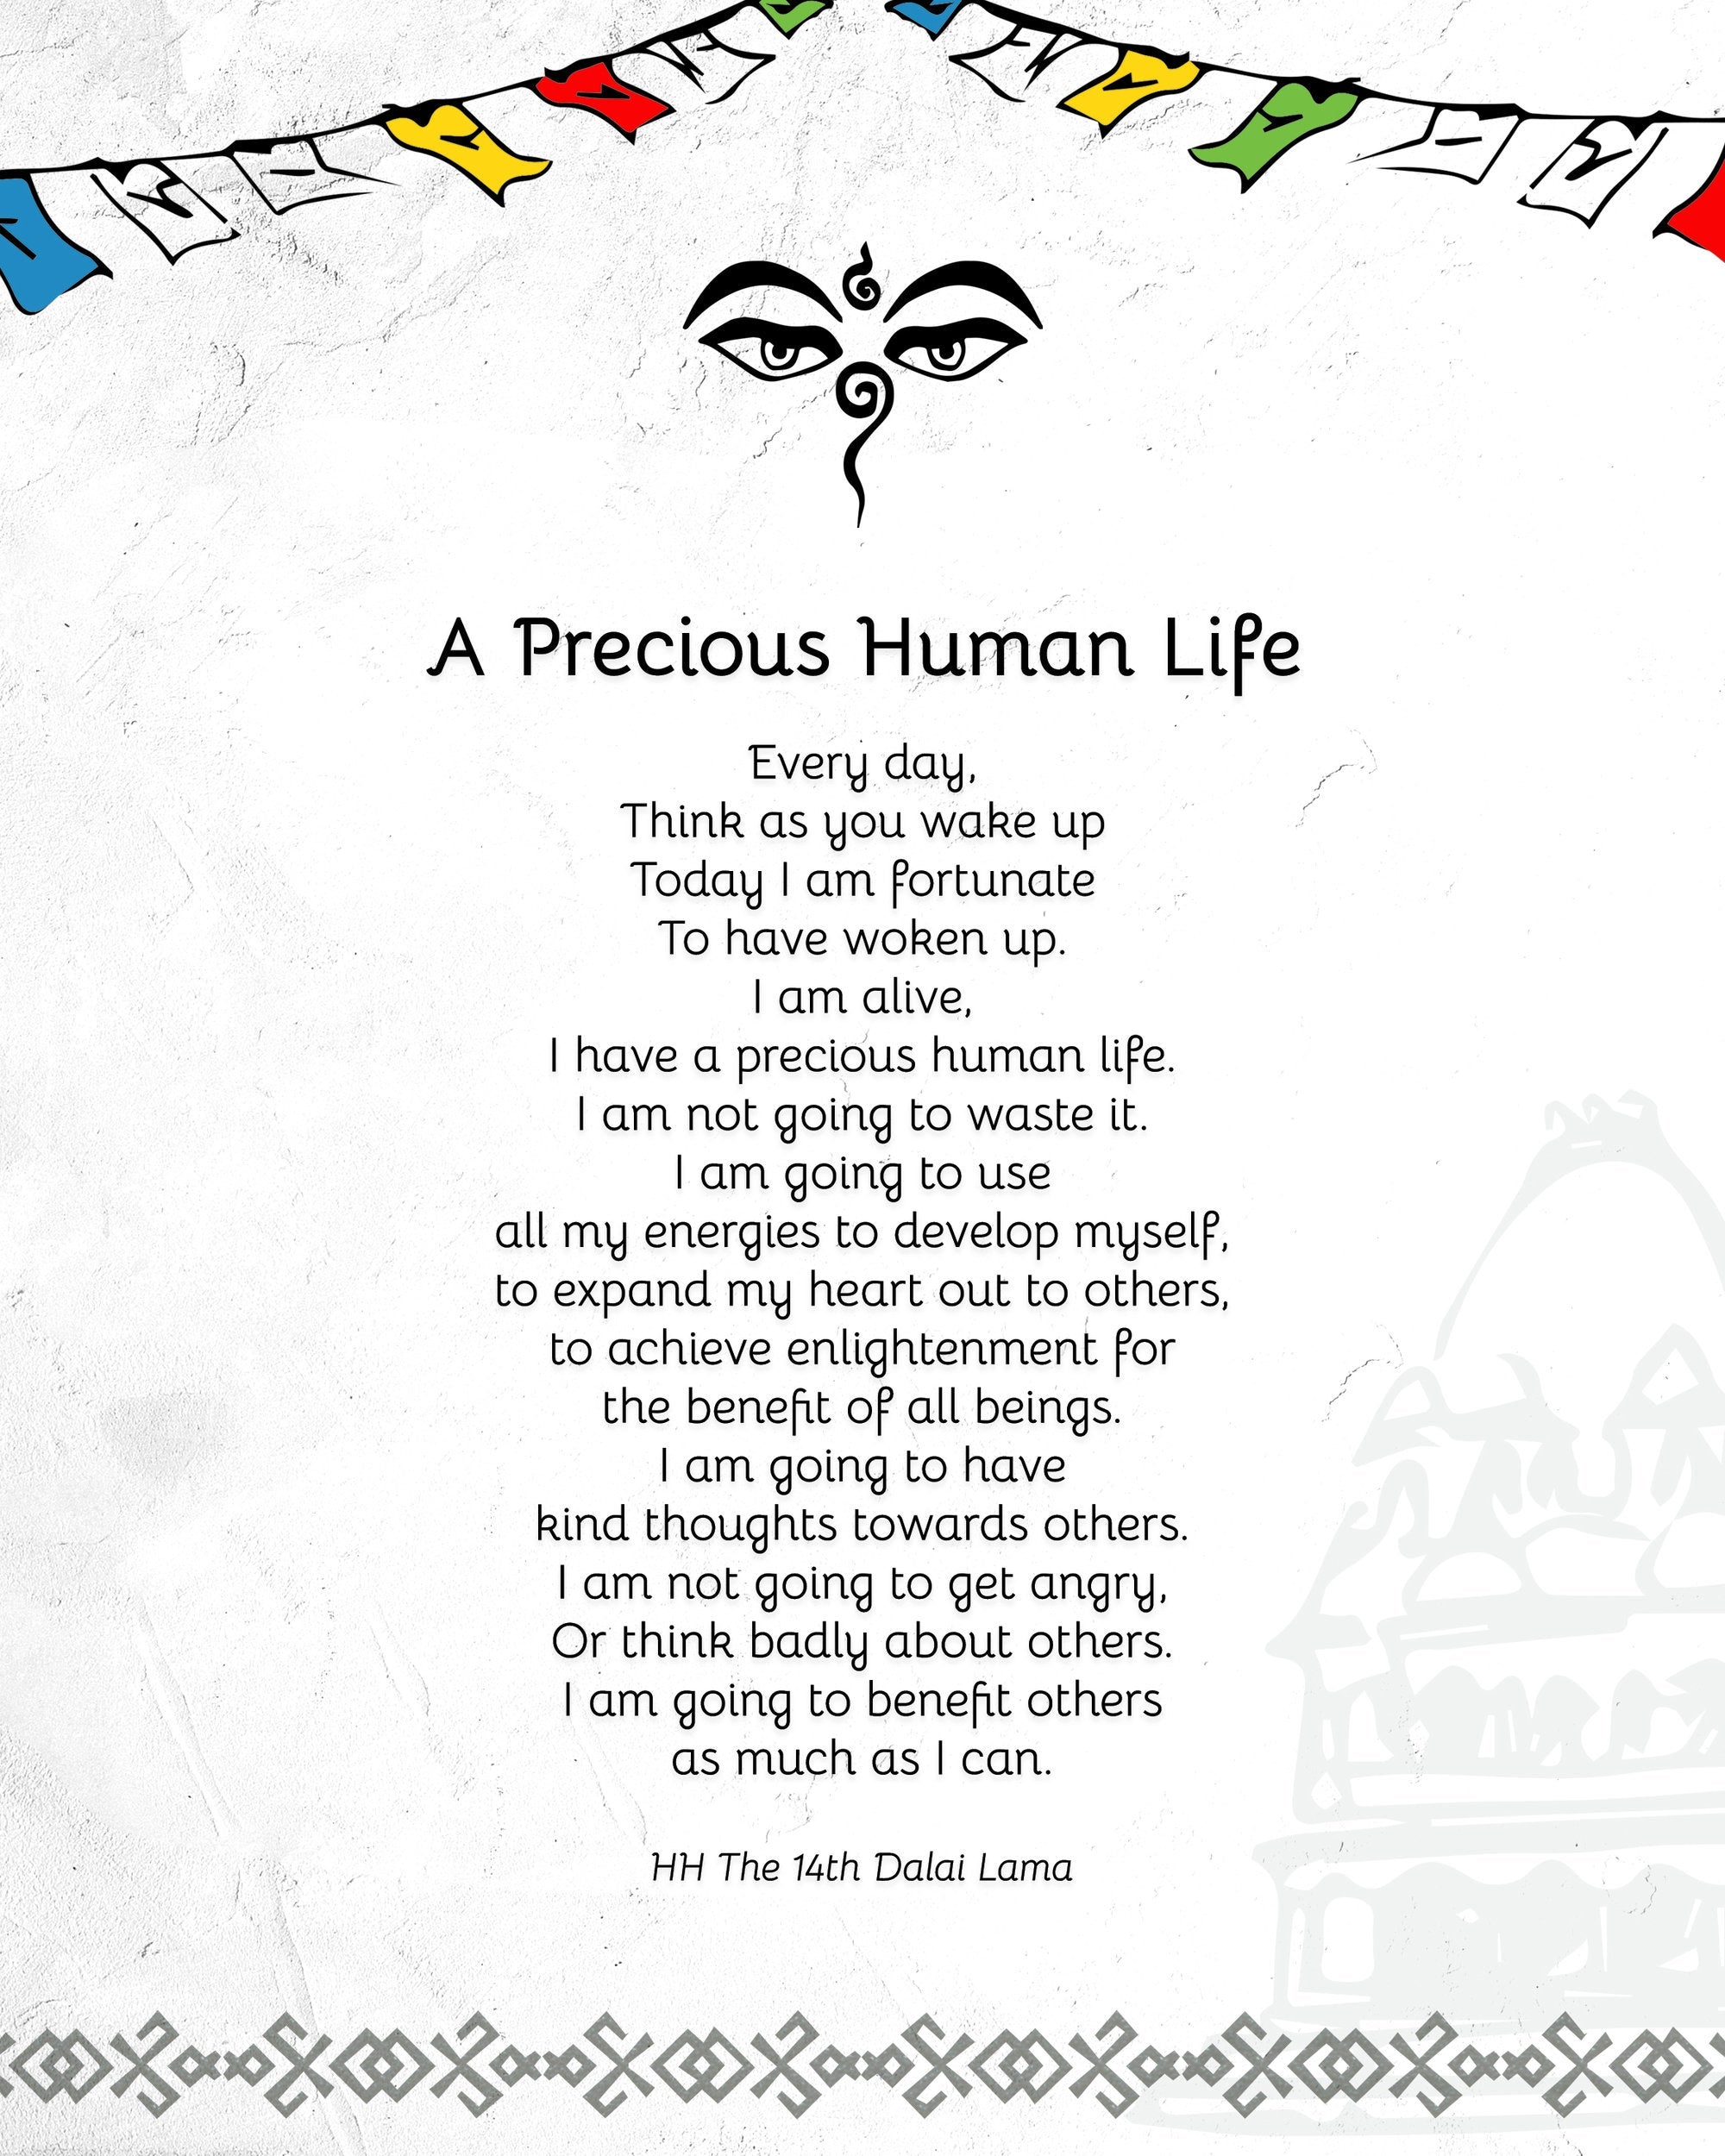 Quotes Prints for Cards, Wall art, Posters. Wisdom quotes by HH the Dalai Lama “A Precious Human Life” for instant download